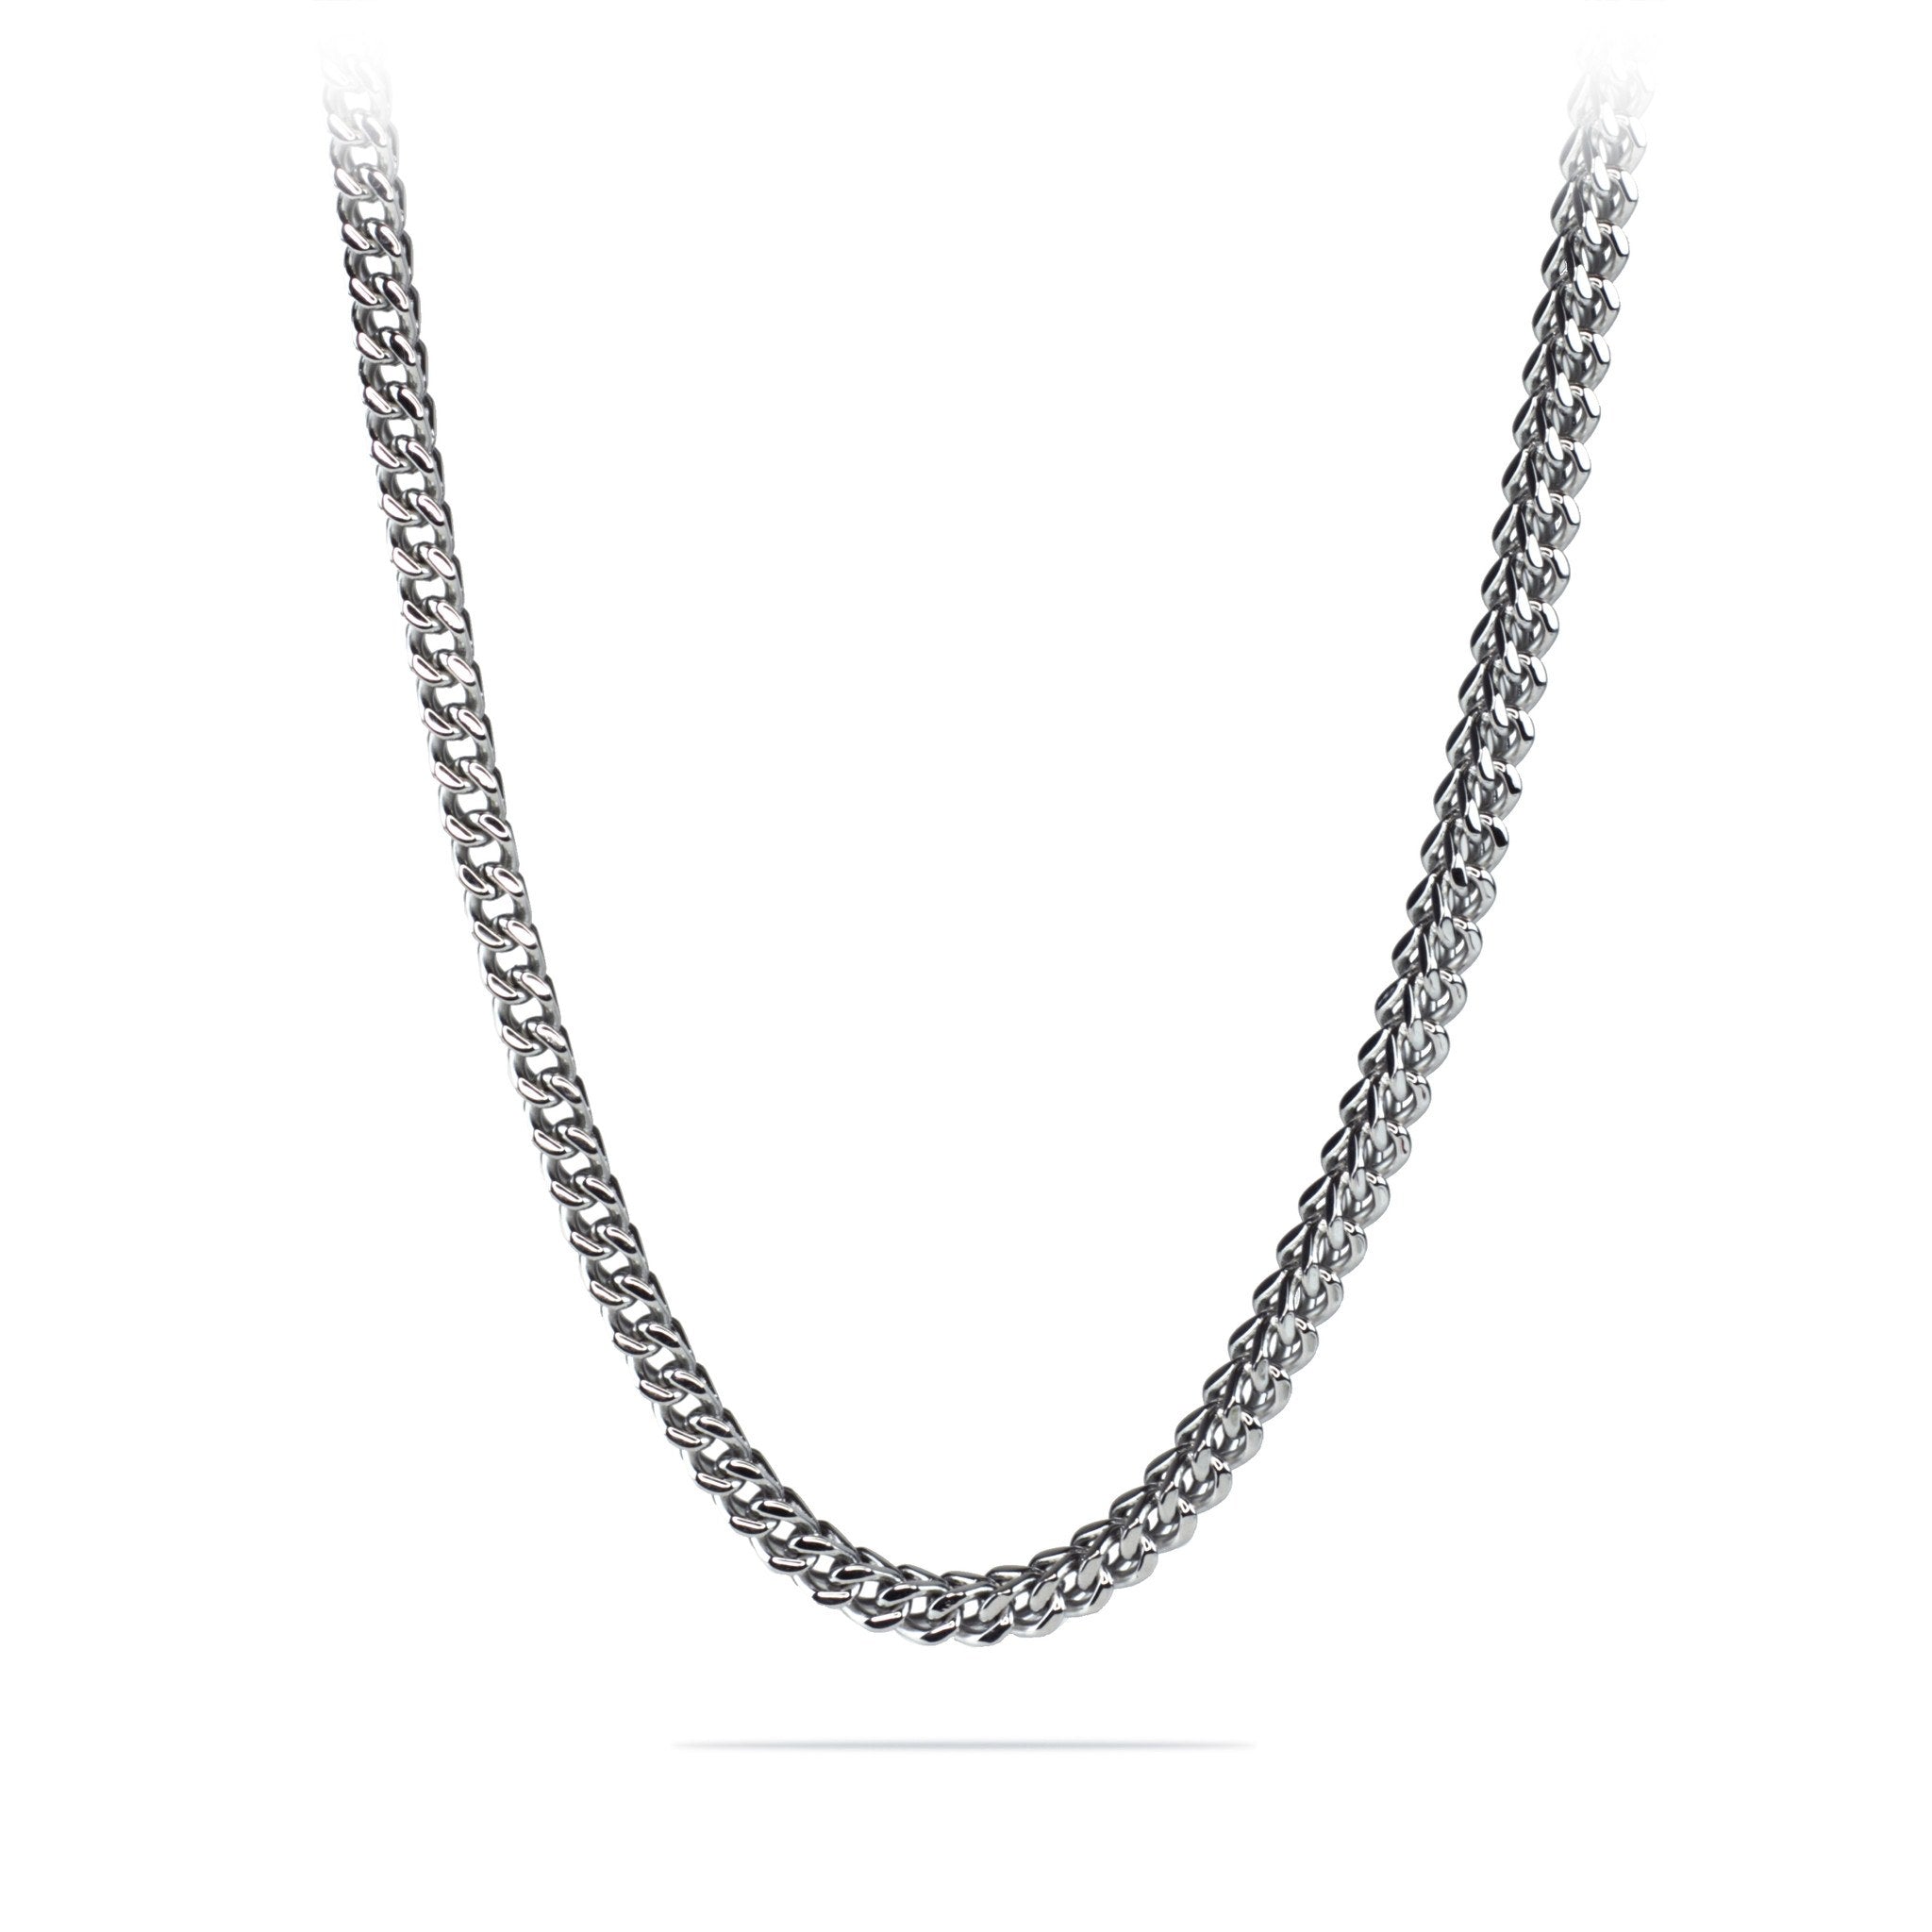 Silver Cuban Link Chain 6mm Silver Necklace Men's 